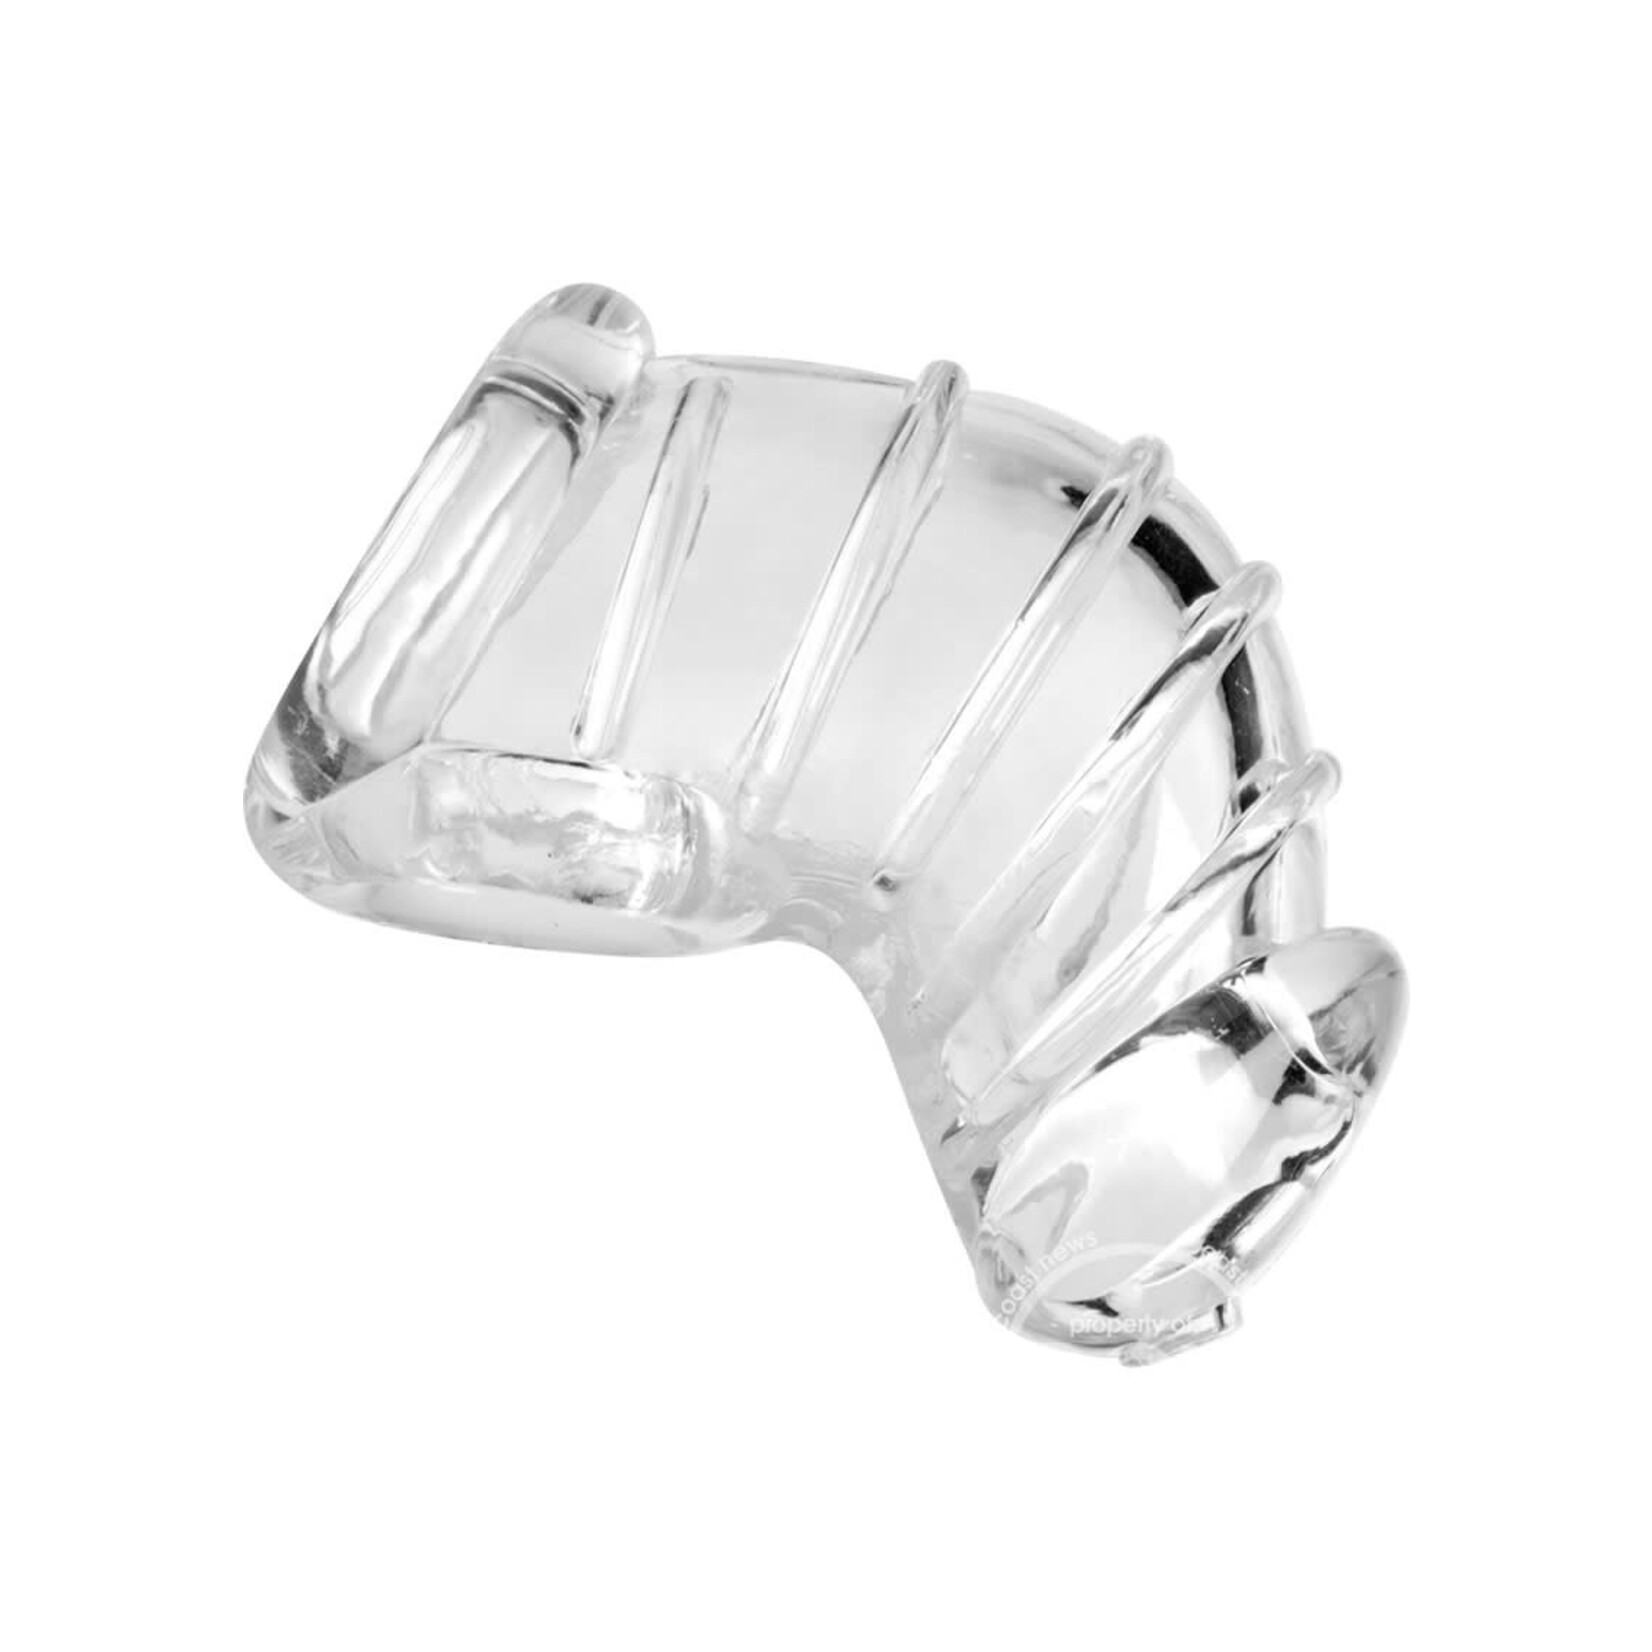 Master Series Detained Soft Body Chastity Cage - Clear